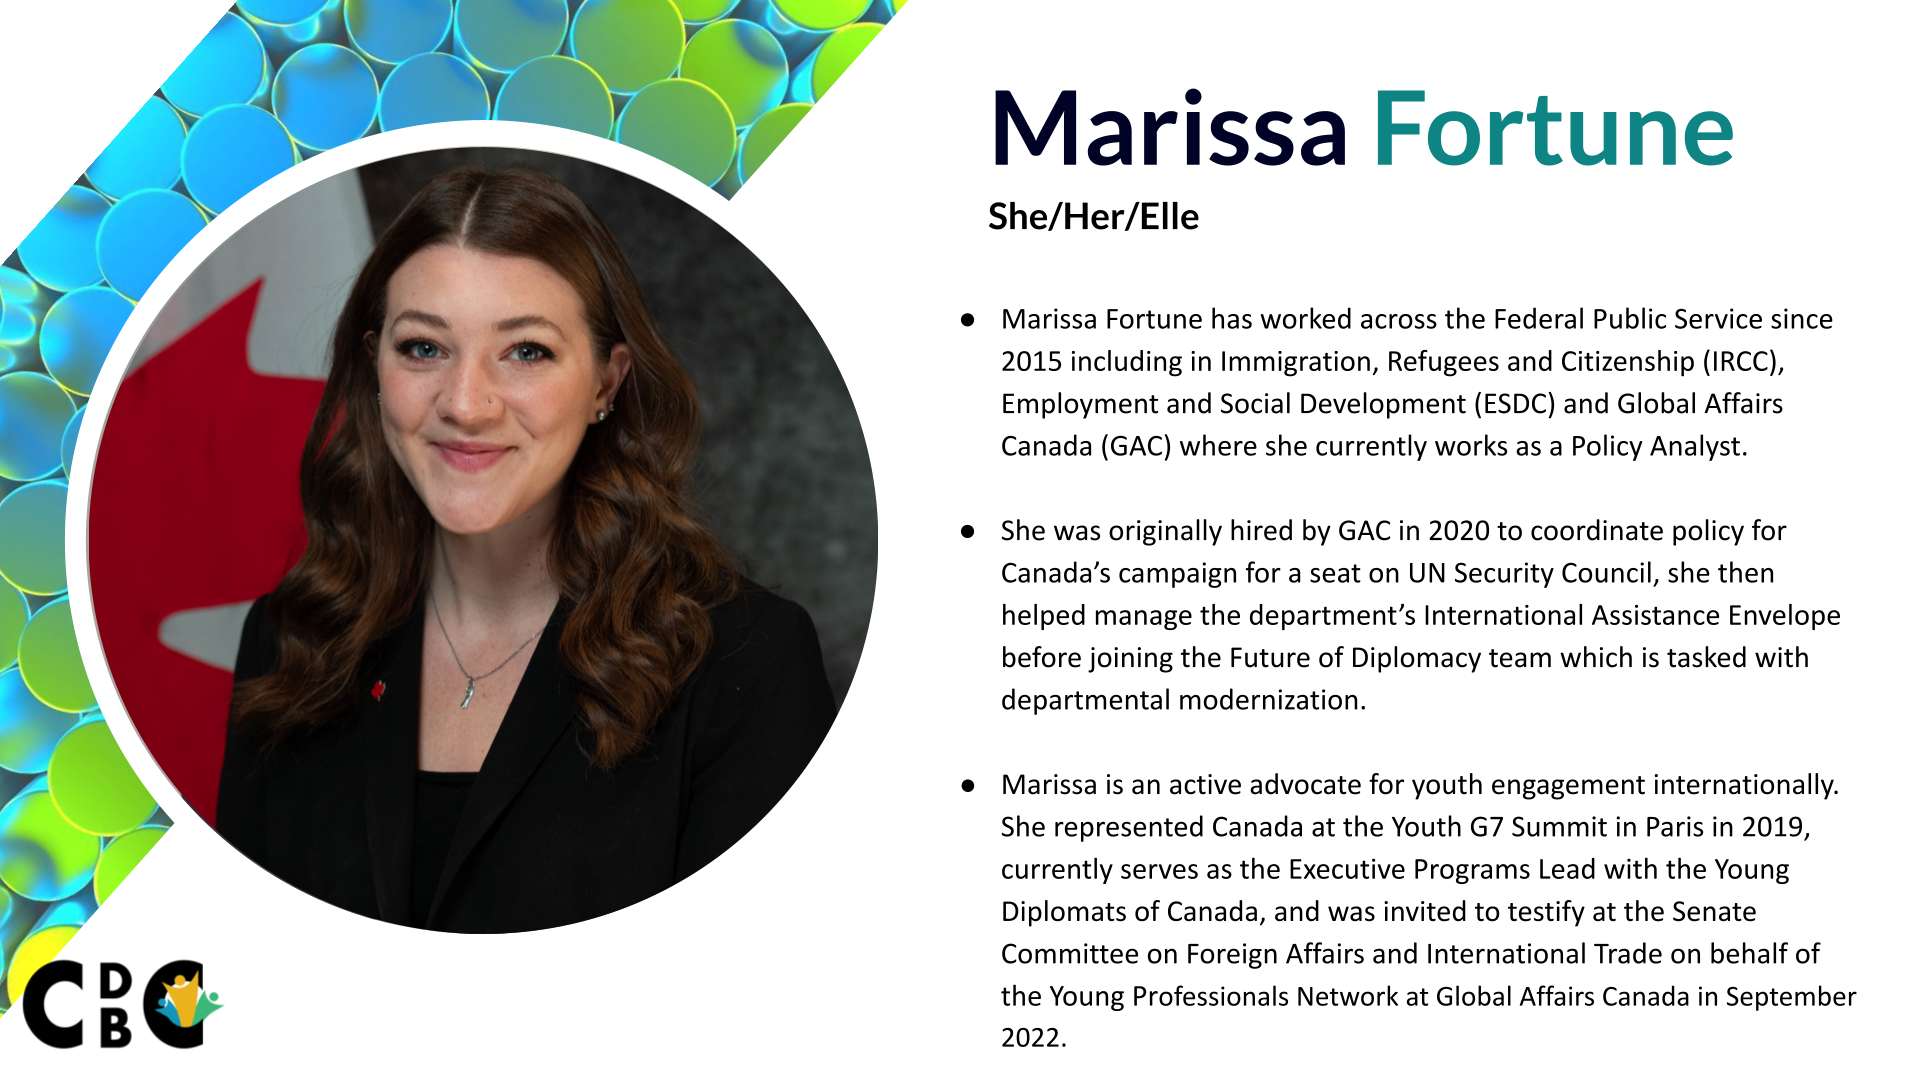 Marissa Fortune - Marissa Fortune has worked across the Federal Public Service since 2015 including in Immigration, Refugees and Citizenship (IRCC), Employment and Social Development (ESDC) and Global Affairs Canada (GAC) where she currently works as a Policy Analyst. She was originally hired by GAC in 2020 to coordinate policy for Canada’s campaign for a seat on UN Security Council, she then helped manage the department’s nearly $8 billion International Assistance Envelope before joining the Future of Diplomacy team which is tasked with departmental modernization Marissa is an active advocate for youth engagement internationally. She represented Canada at the Youth G7 Summit in Paris in 2019, currently serves as the Executive Programs Lead with the Young Diplomats of Canada, and was invited to testify at the Senate Committee on Foreign Affairs and International Trade on behalf of the Young Professionals Network at Global Affairs Canada in September 2022.